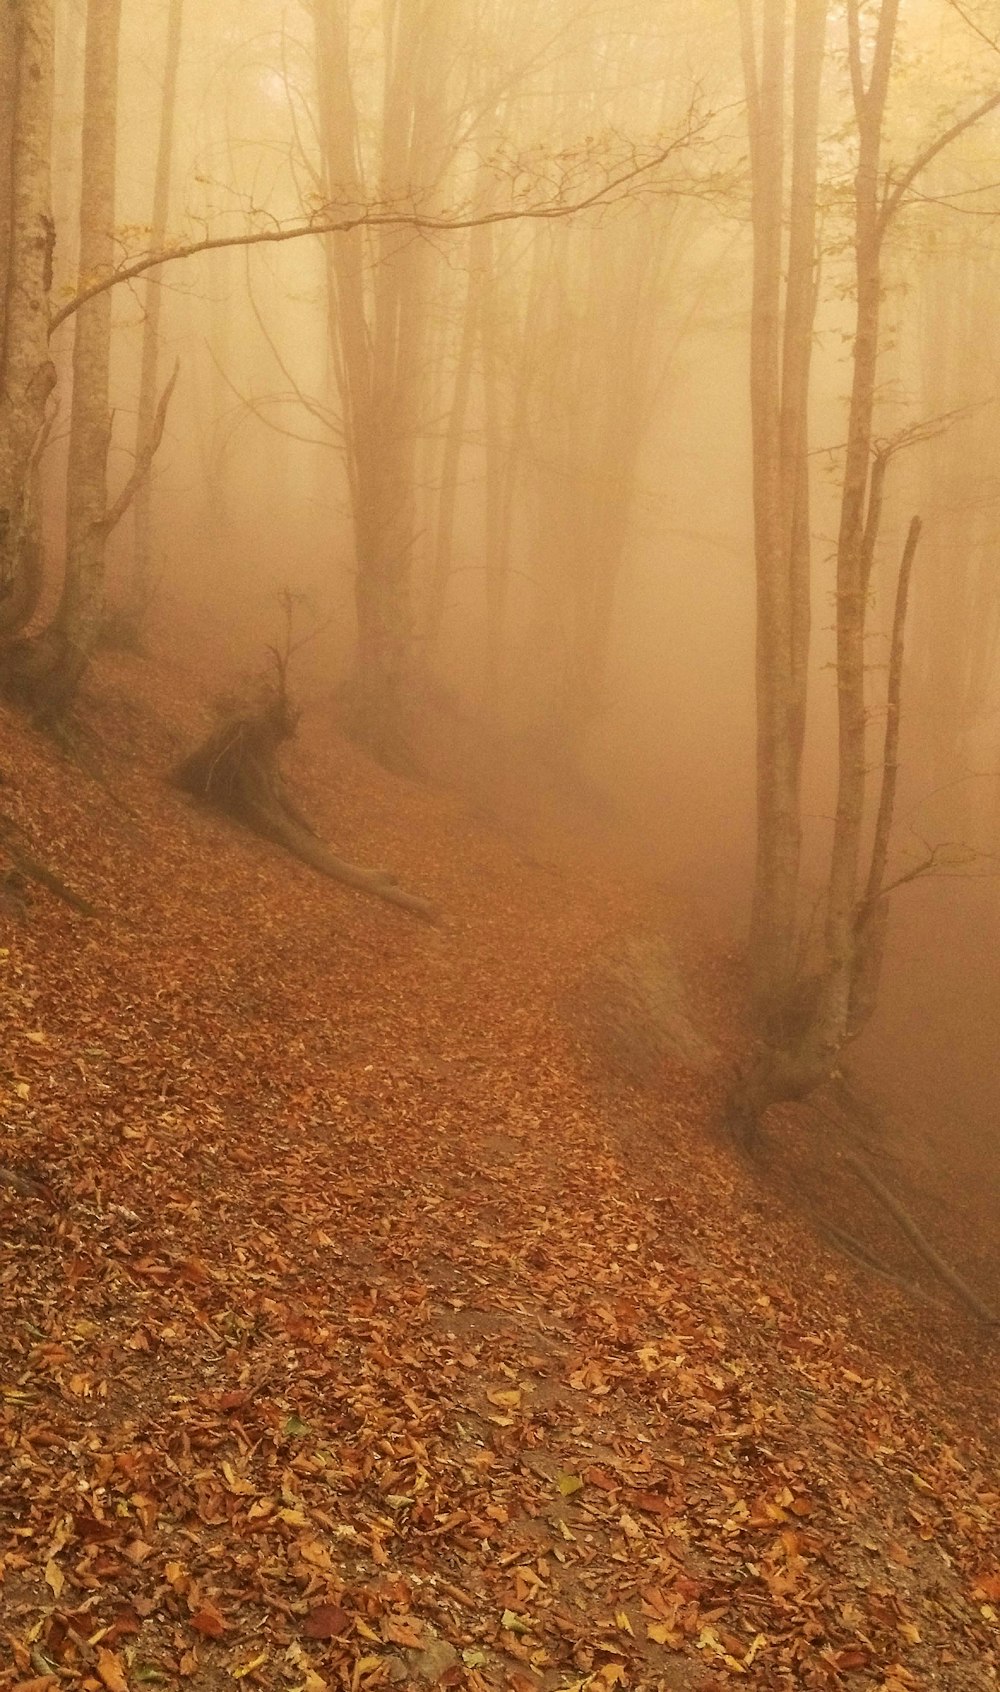 a foggy path in the woods with leaves on the ground